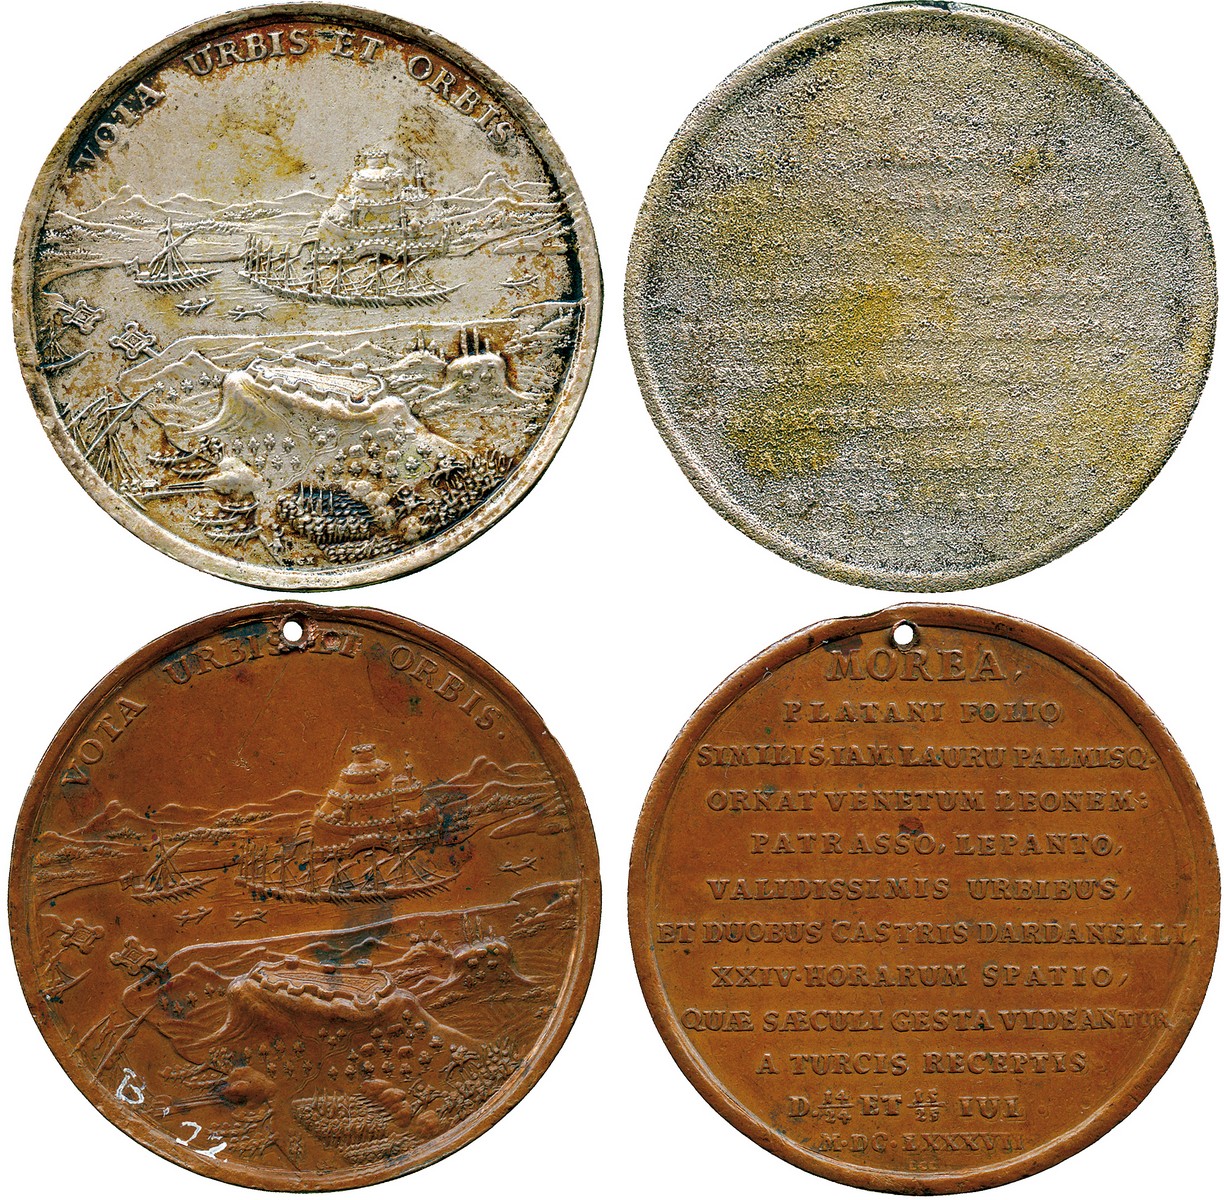 COMMEMORATIVE MEDALS, WORLD MEDALS, Greece, Germany, The Conquest of Patras and Lepanto in Morea,